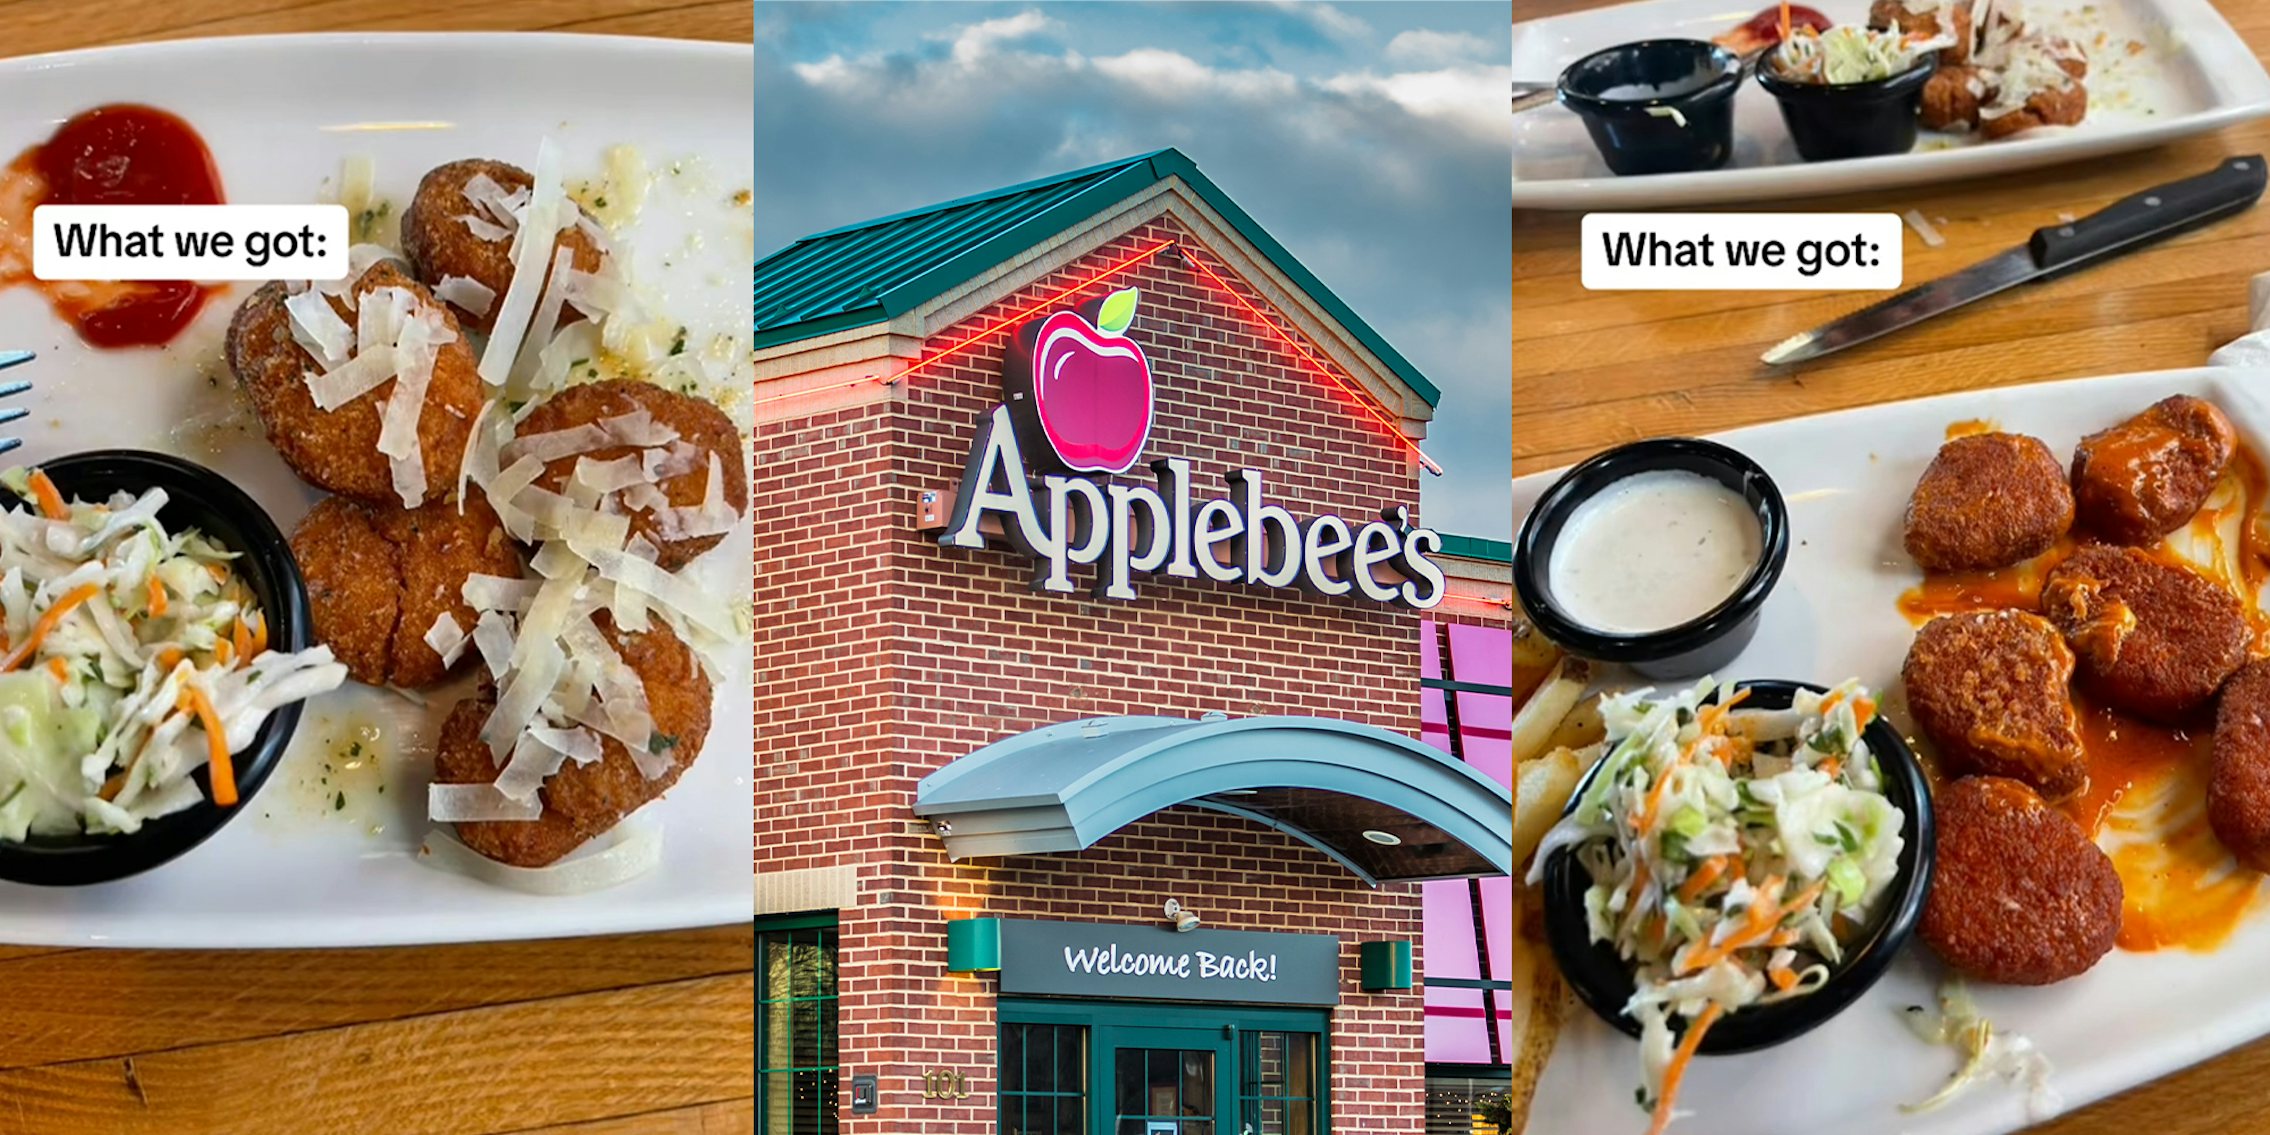 Customers go to Applebee’s for all you can eat wings.